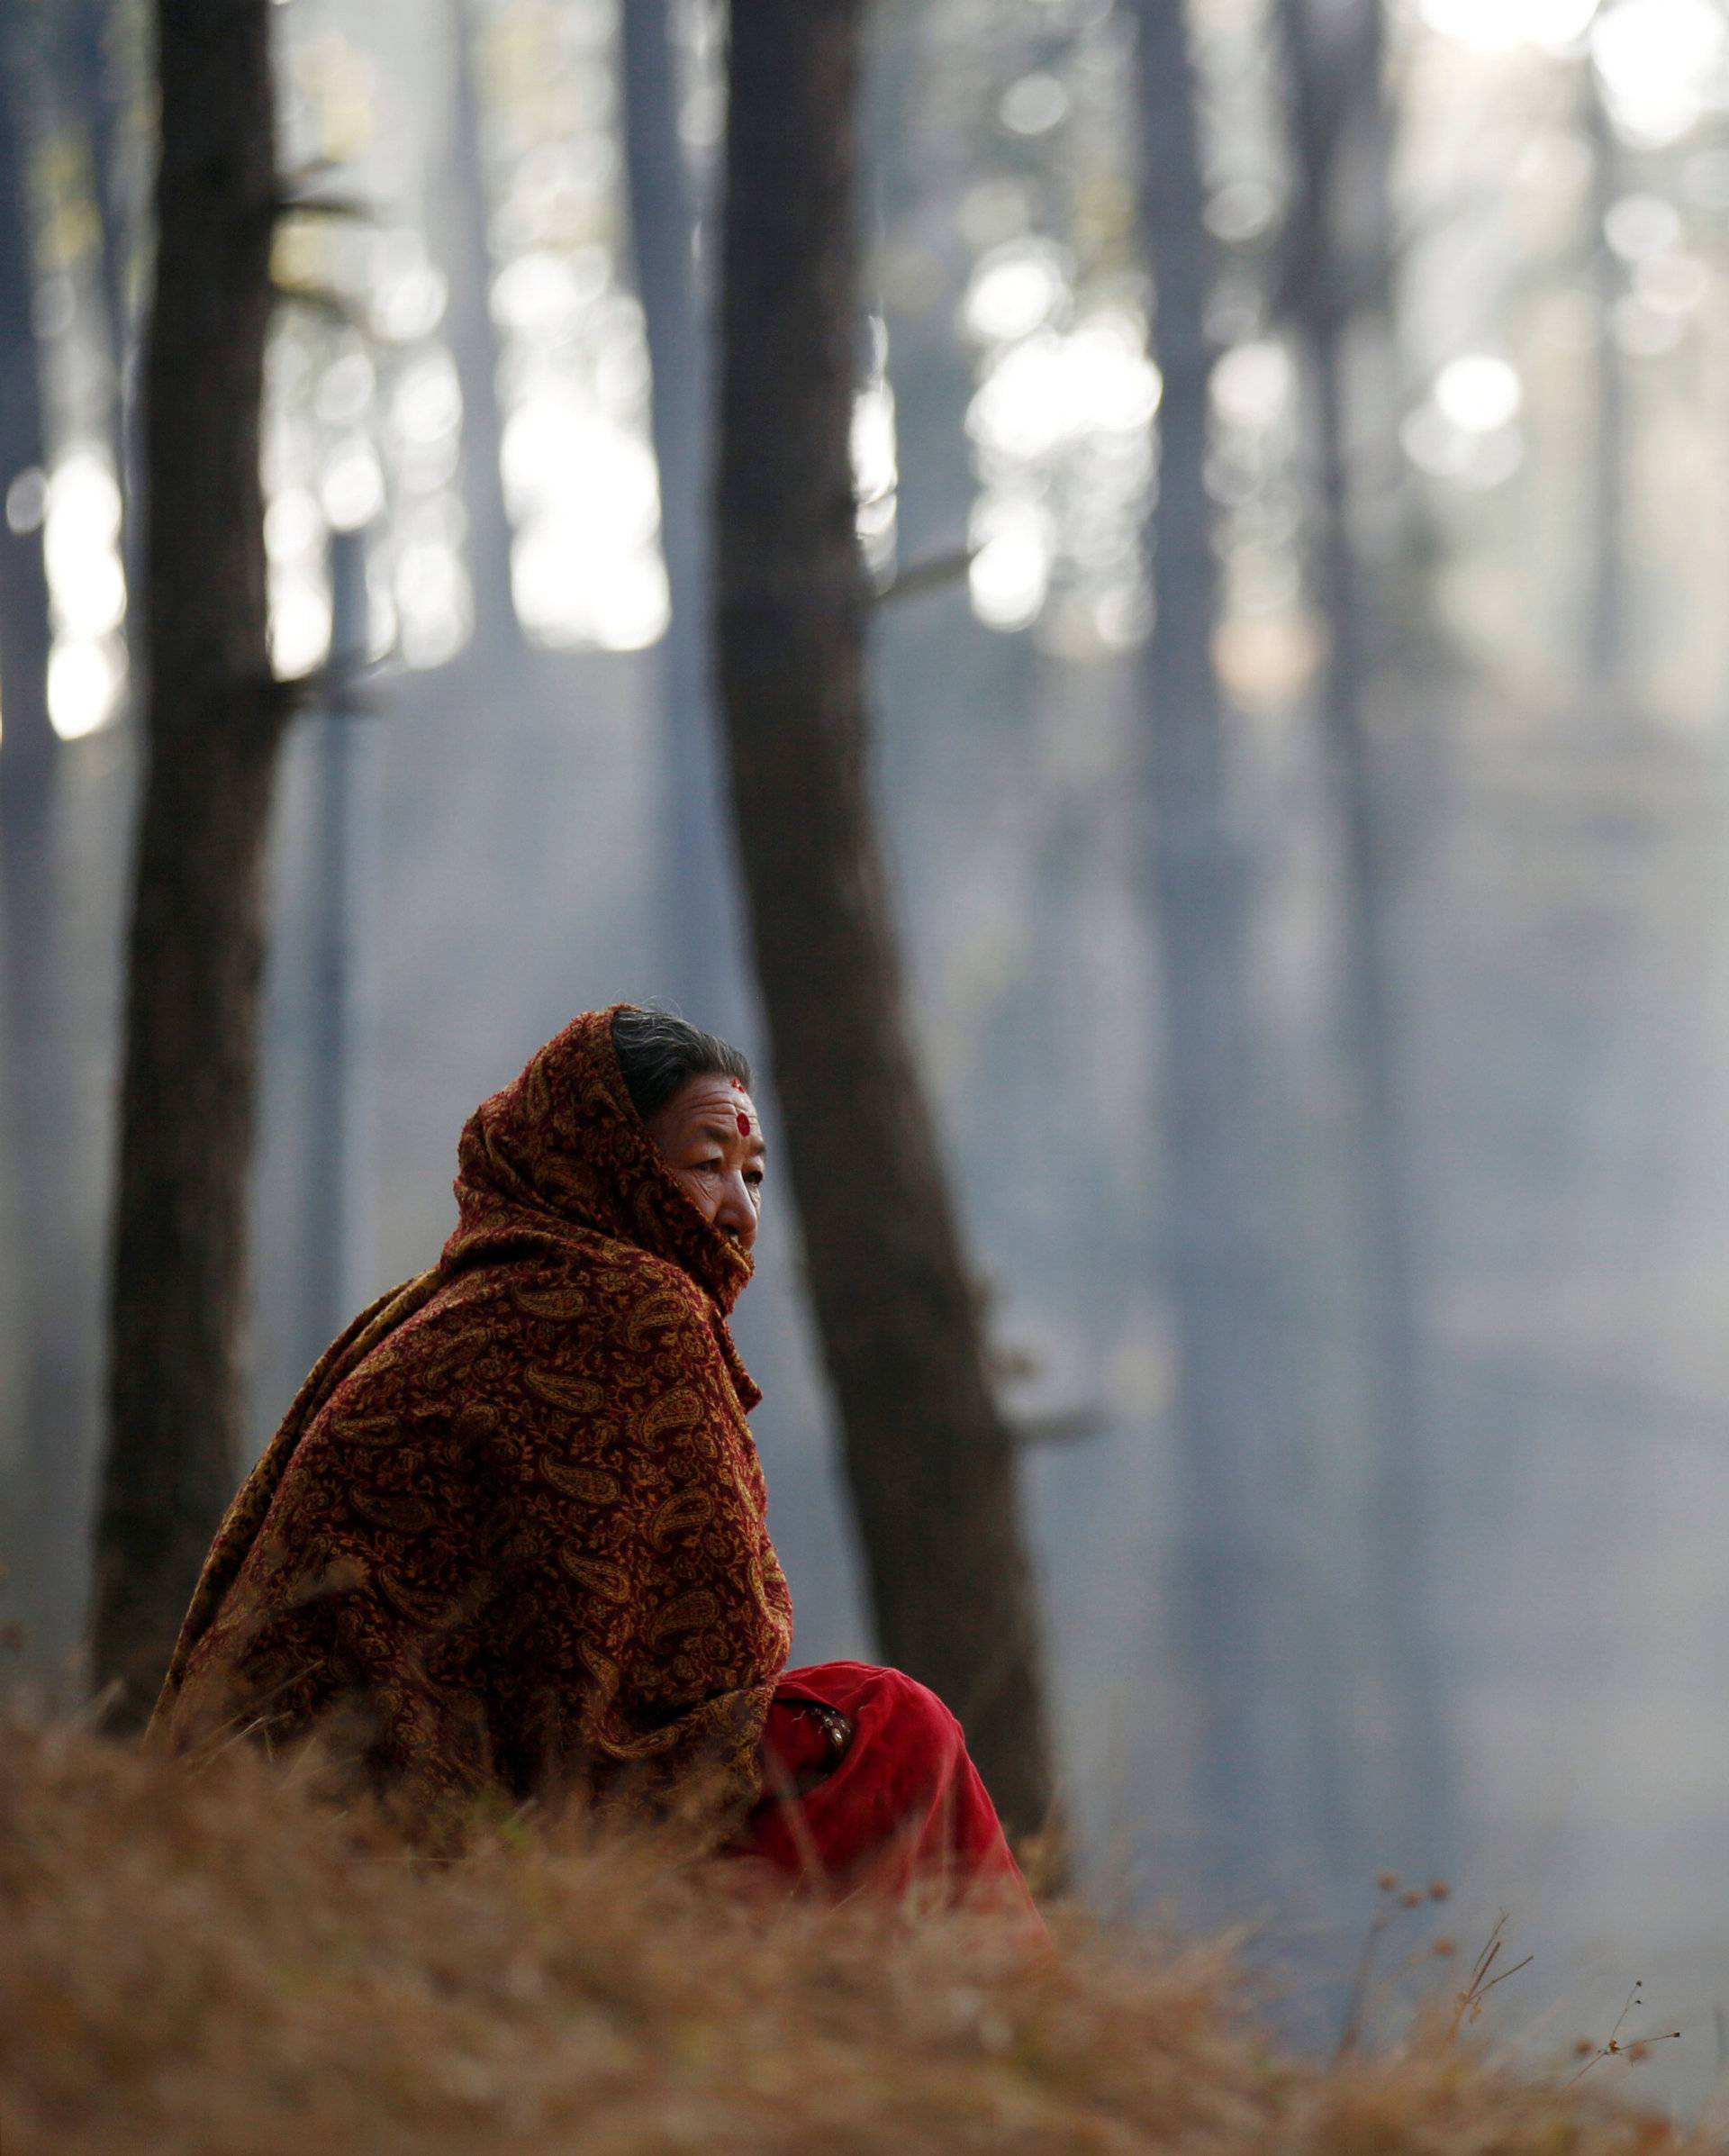 A devotee sits along the woods of Changu Narayan during the Swasthani Bratakatha festival in Bhaktapur